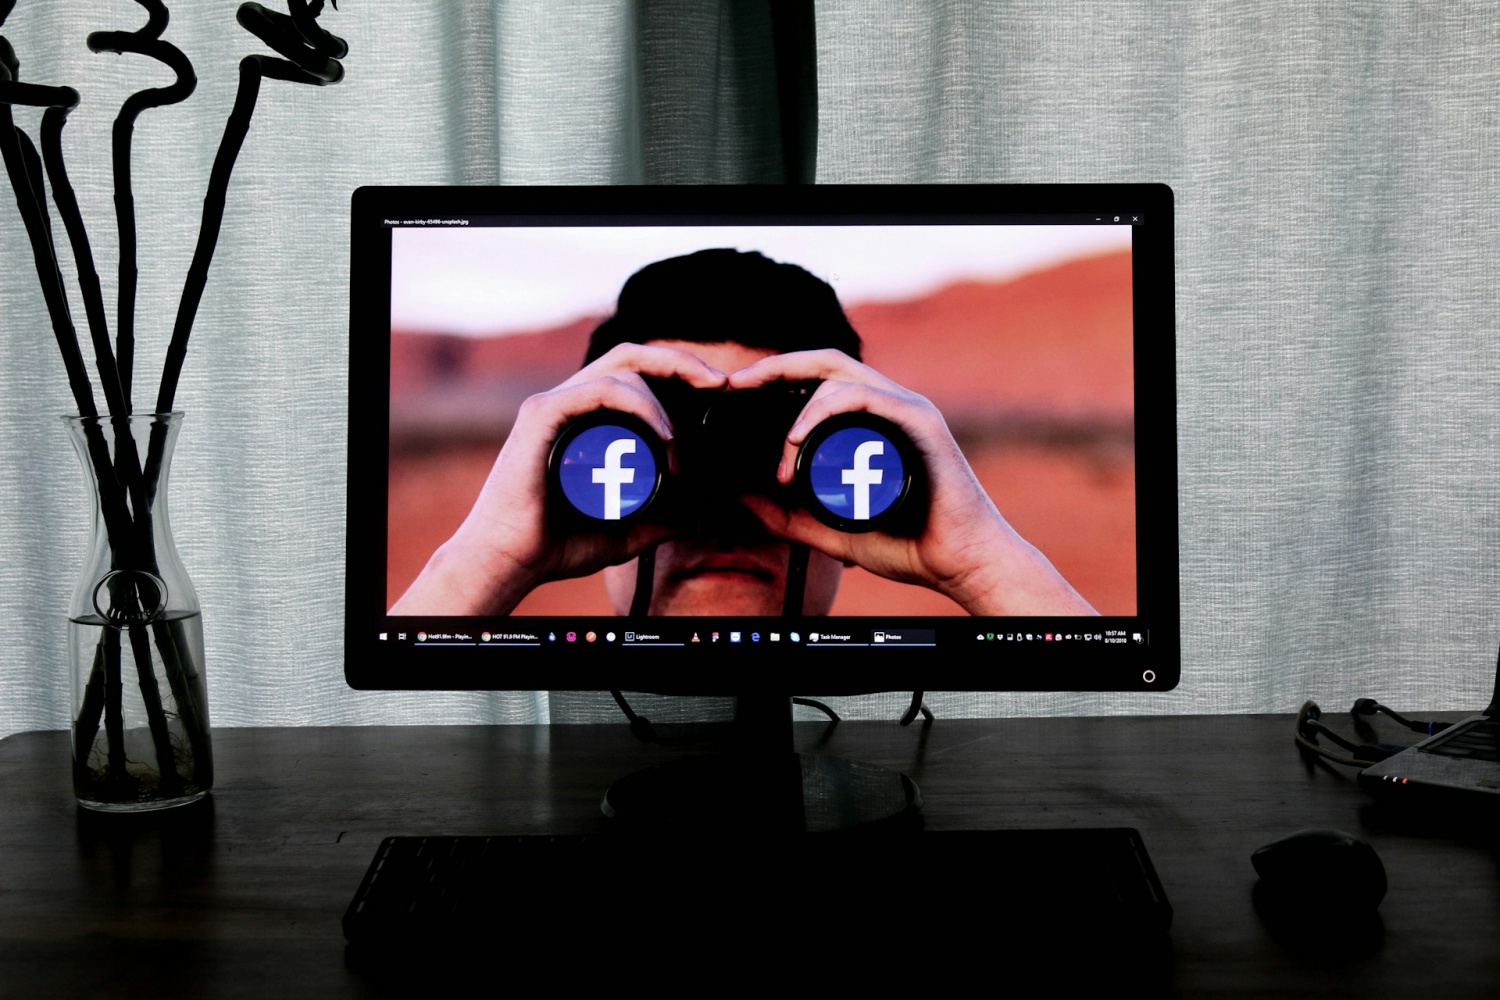 Is Someone Trying to Access Your Facebook? Here Are the Signs to Watch Out